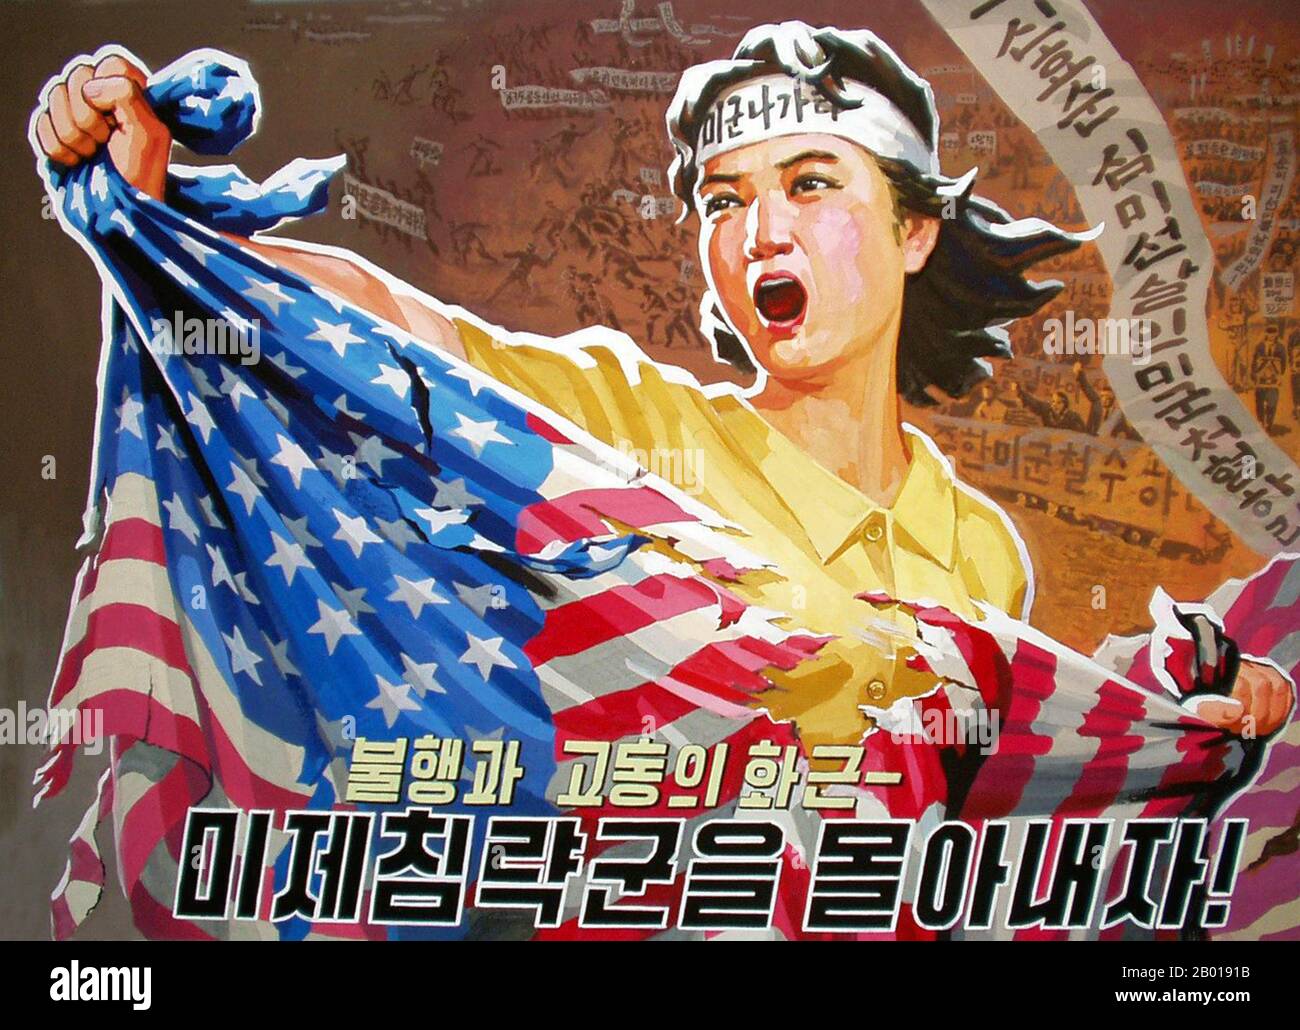 Korea: North Korean (DPRK) propaganda poster - 'Tear up the American Flag', c. 1950s.  Socialist Realism is a style of realistic art which developed under Socialism in the Soviet Union and became a dominant style in other communist countries. Socialist Realism is a teleologically-oriented style having as its purpose the furtherance of the goals of socialism and communism. Although related, it should not be confused with Social Realism, a type of art that realistically depicts subjects of social concern. Socialist Realism generally glorifies the ideology of the communist state. Stock Photo